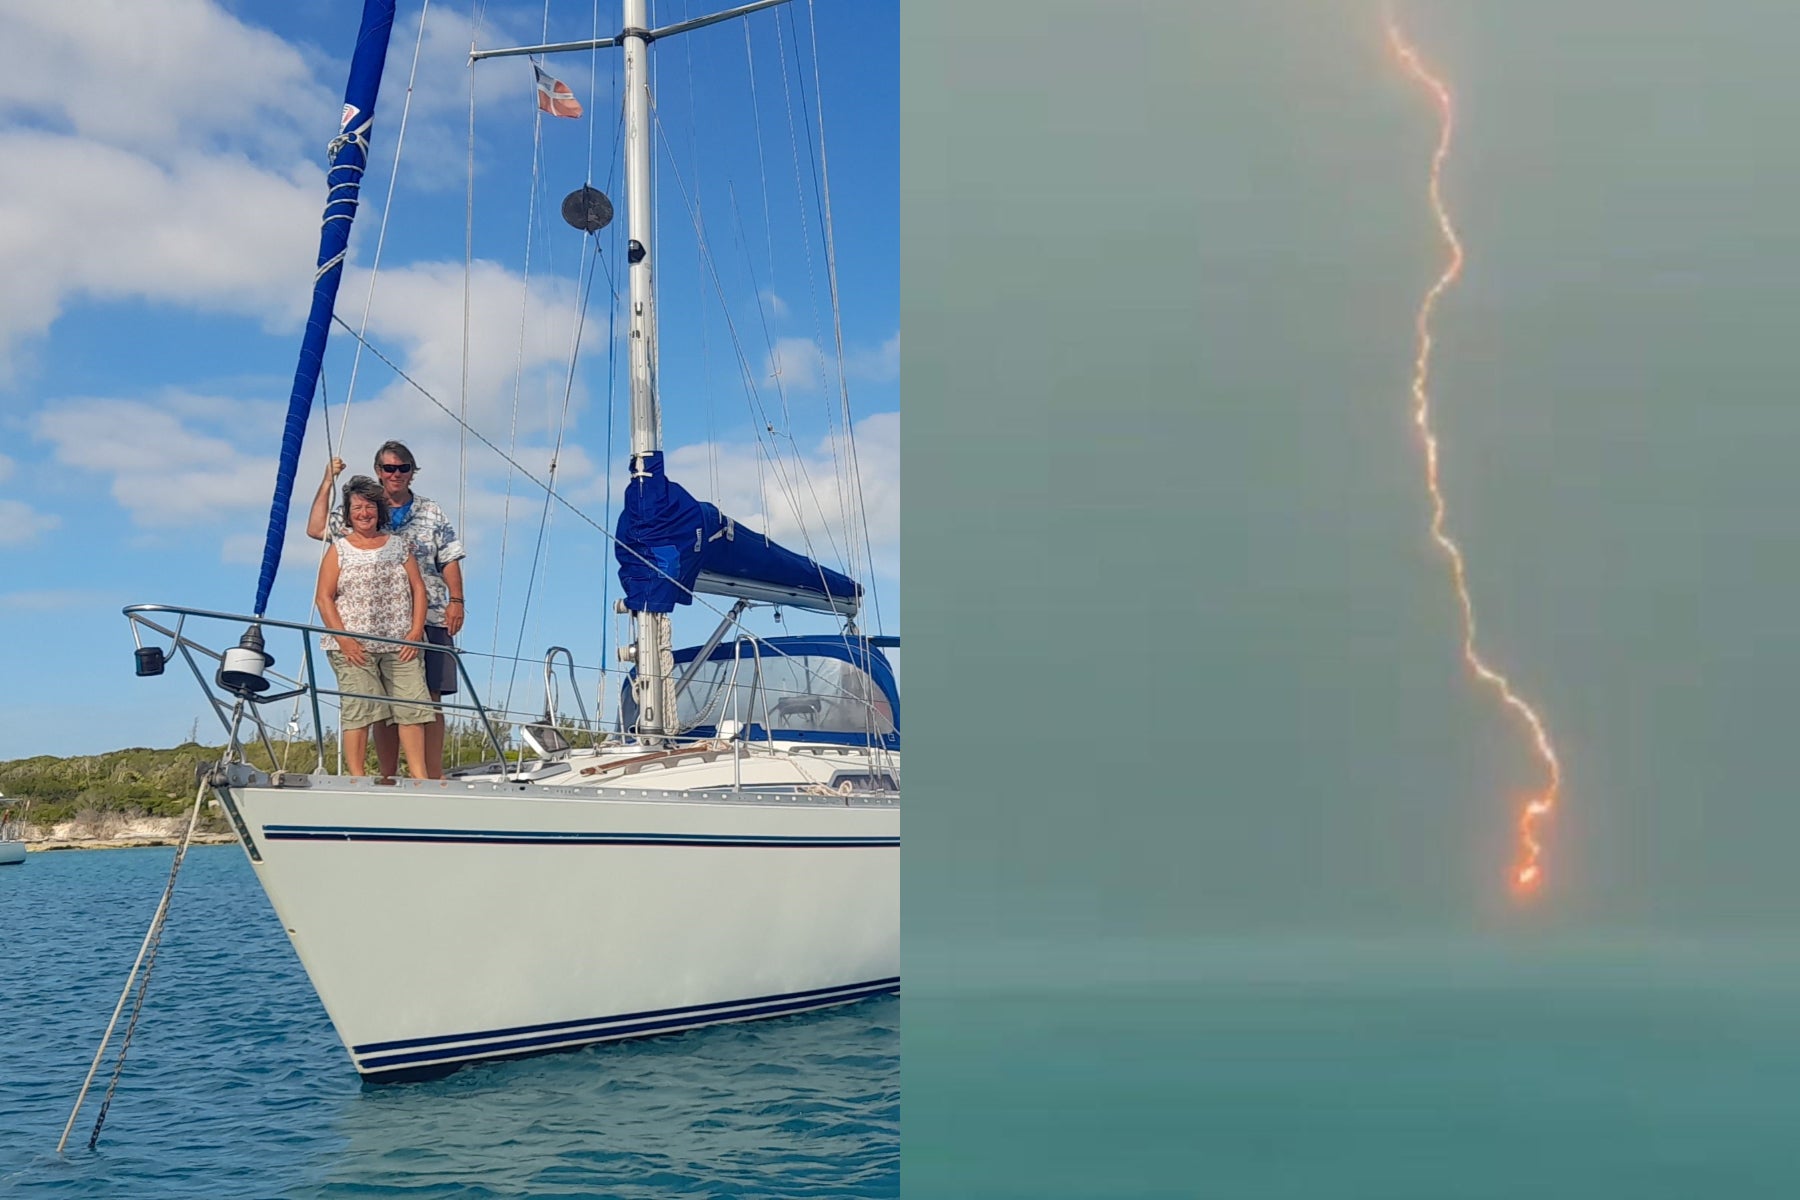 The lightning bolt, which was captured on camera from a distance, has destroyed almost all of the boat’s electrical equipment